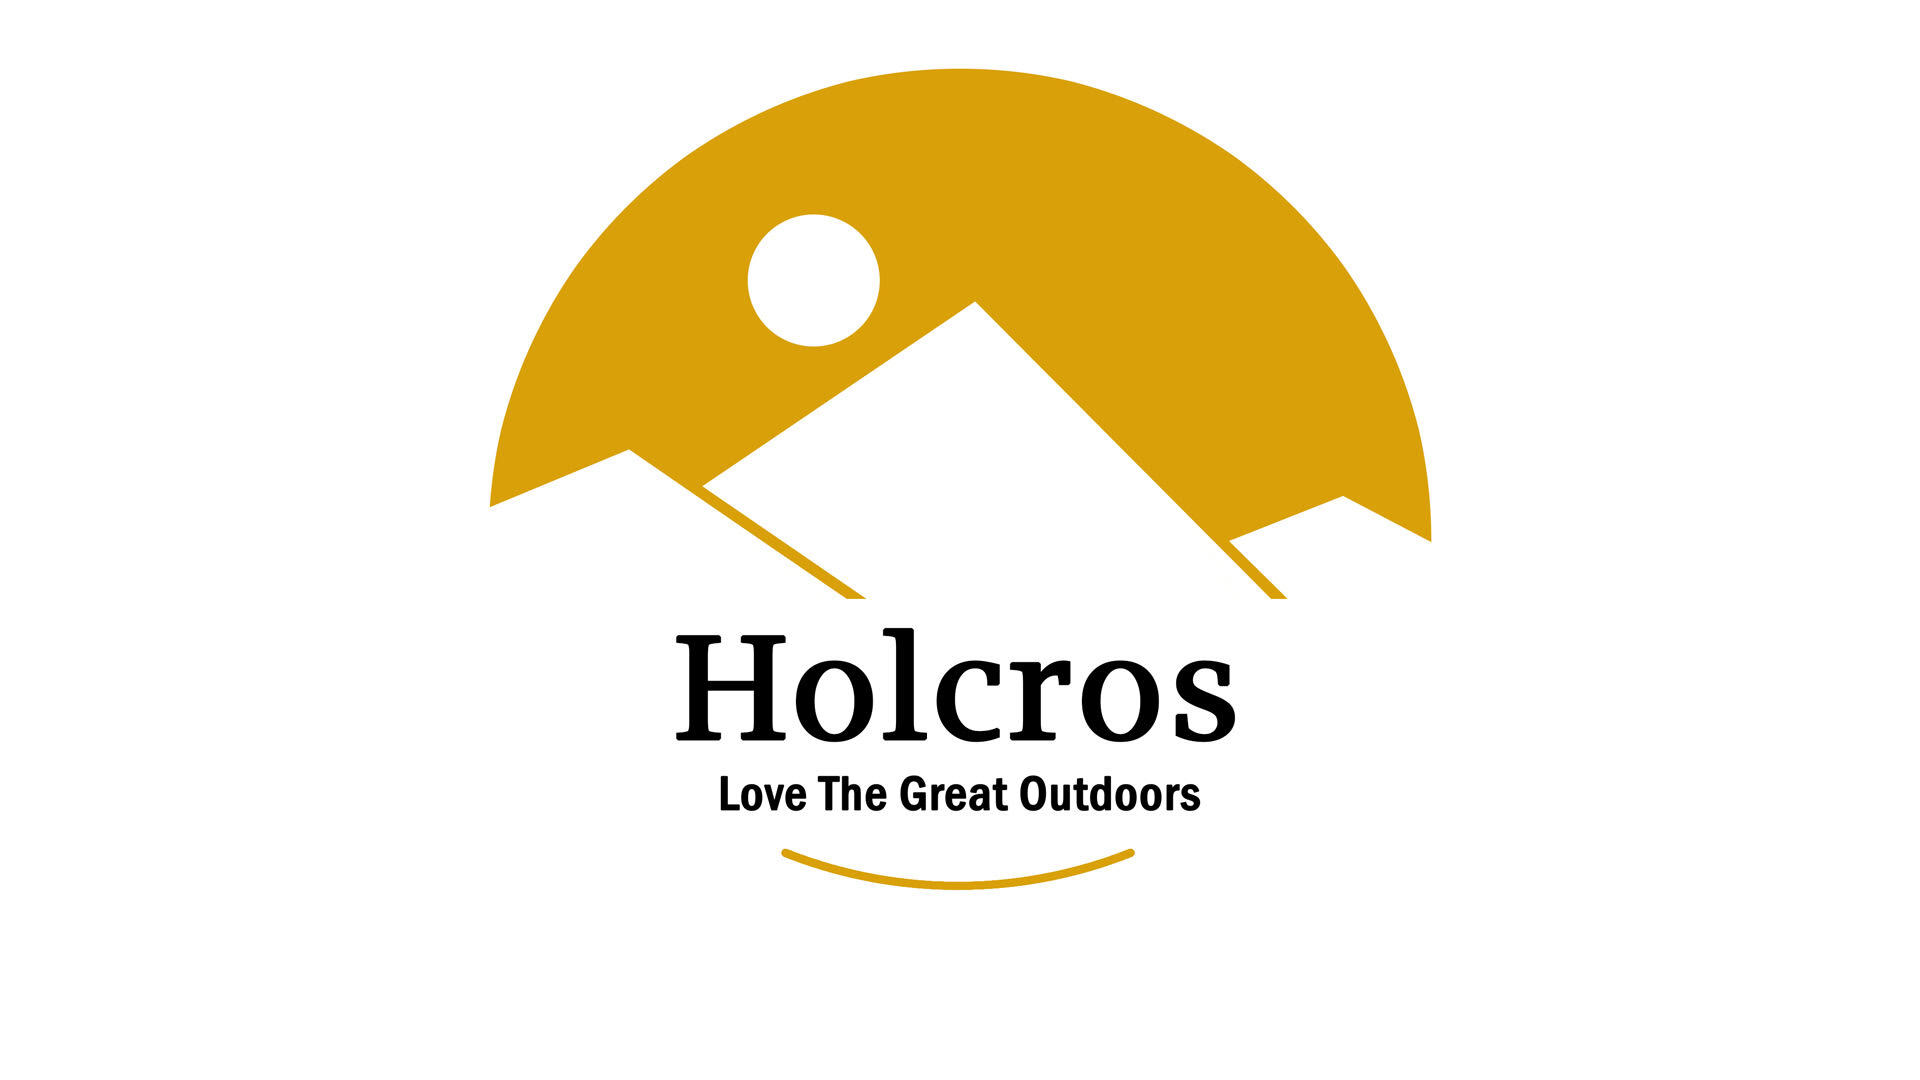 Holcros increases revenue 224% and revenue from text ads 32% using Bidnamic’s technology